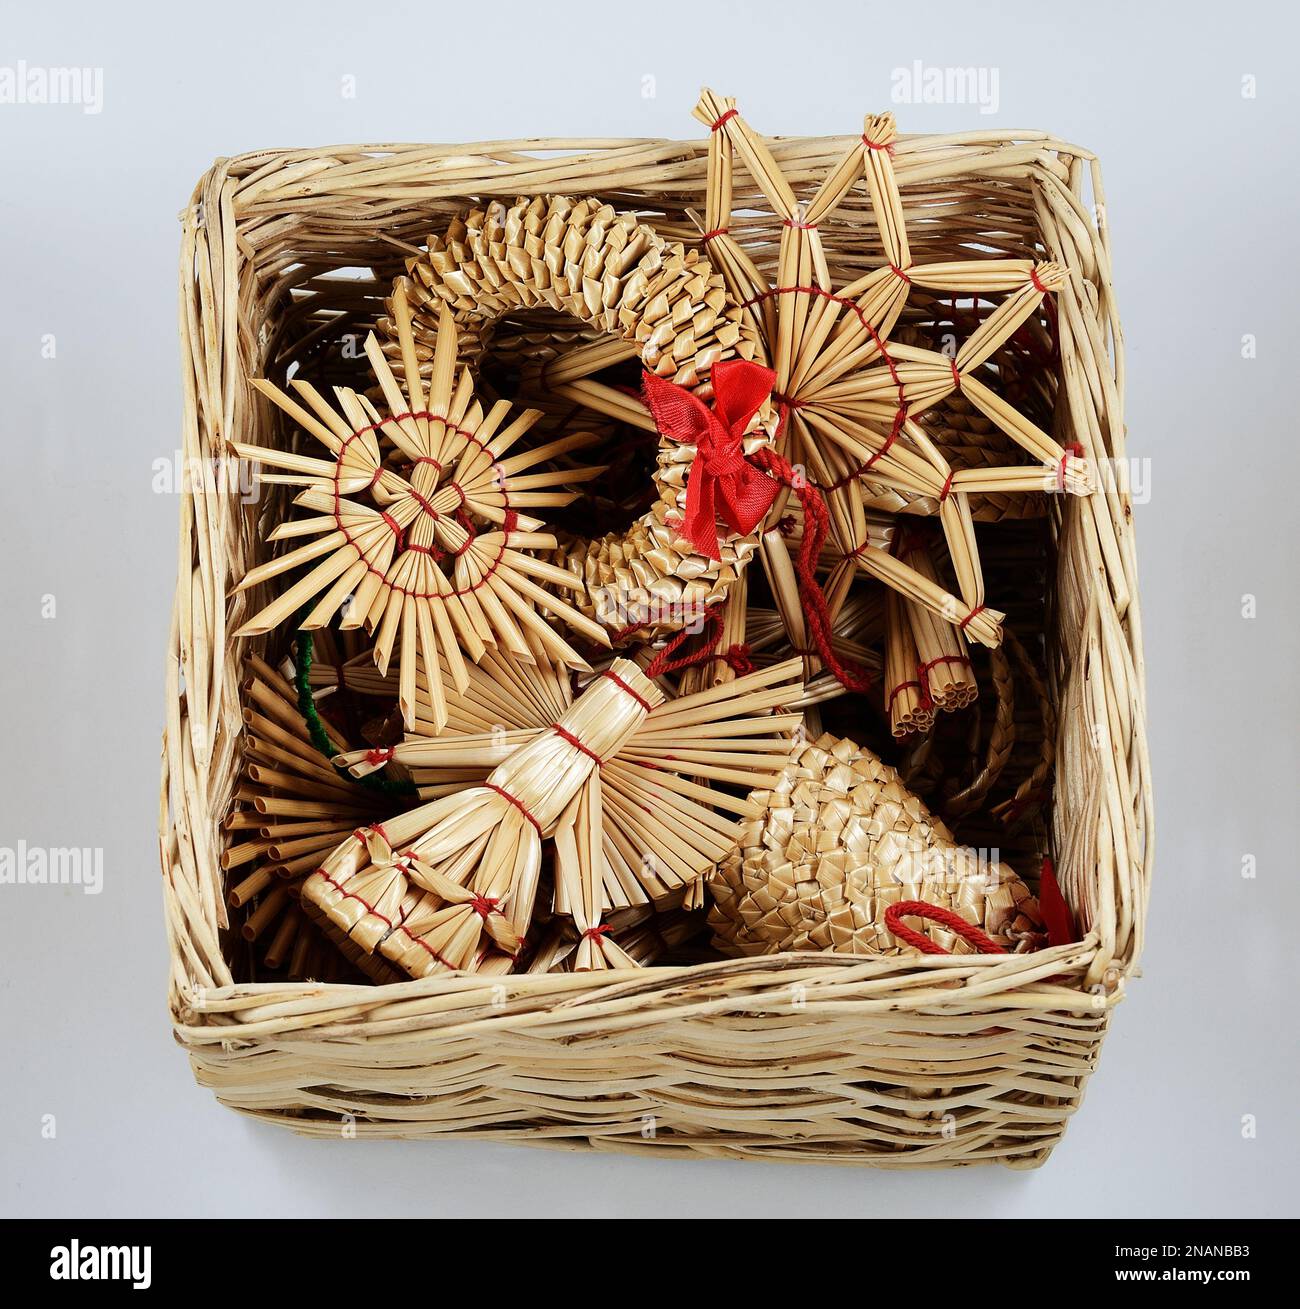 traditional Christmas straw decorations in a wicker box on a neutral background Stock Photo